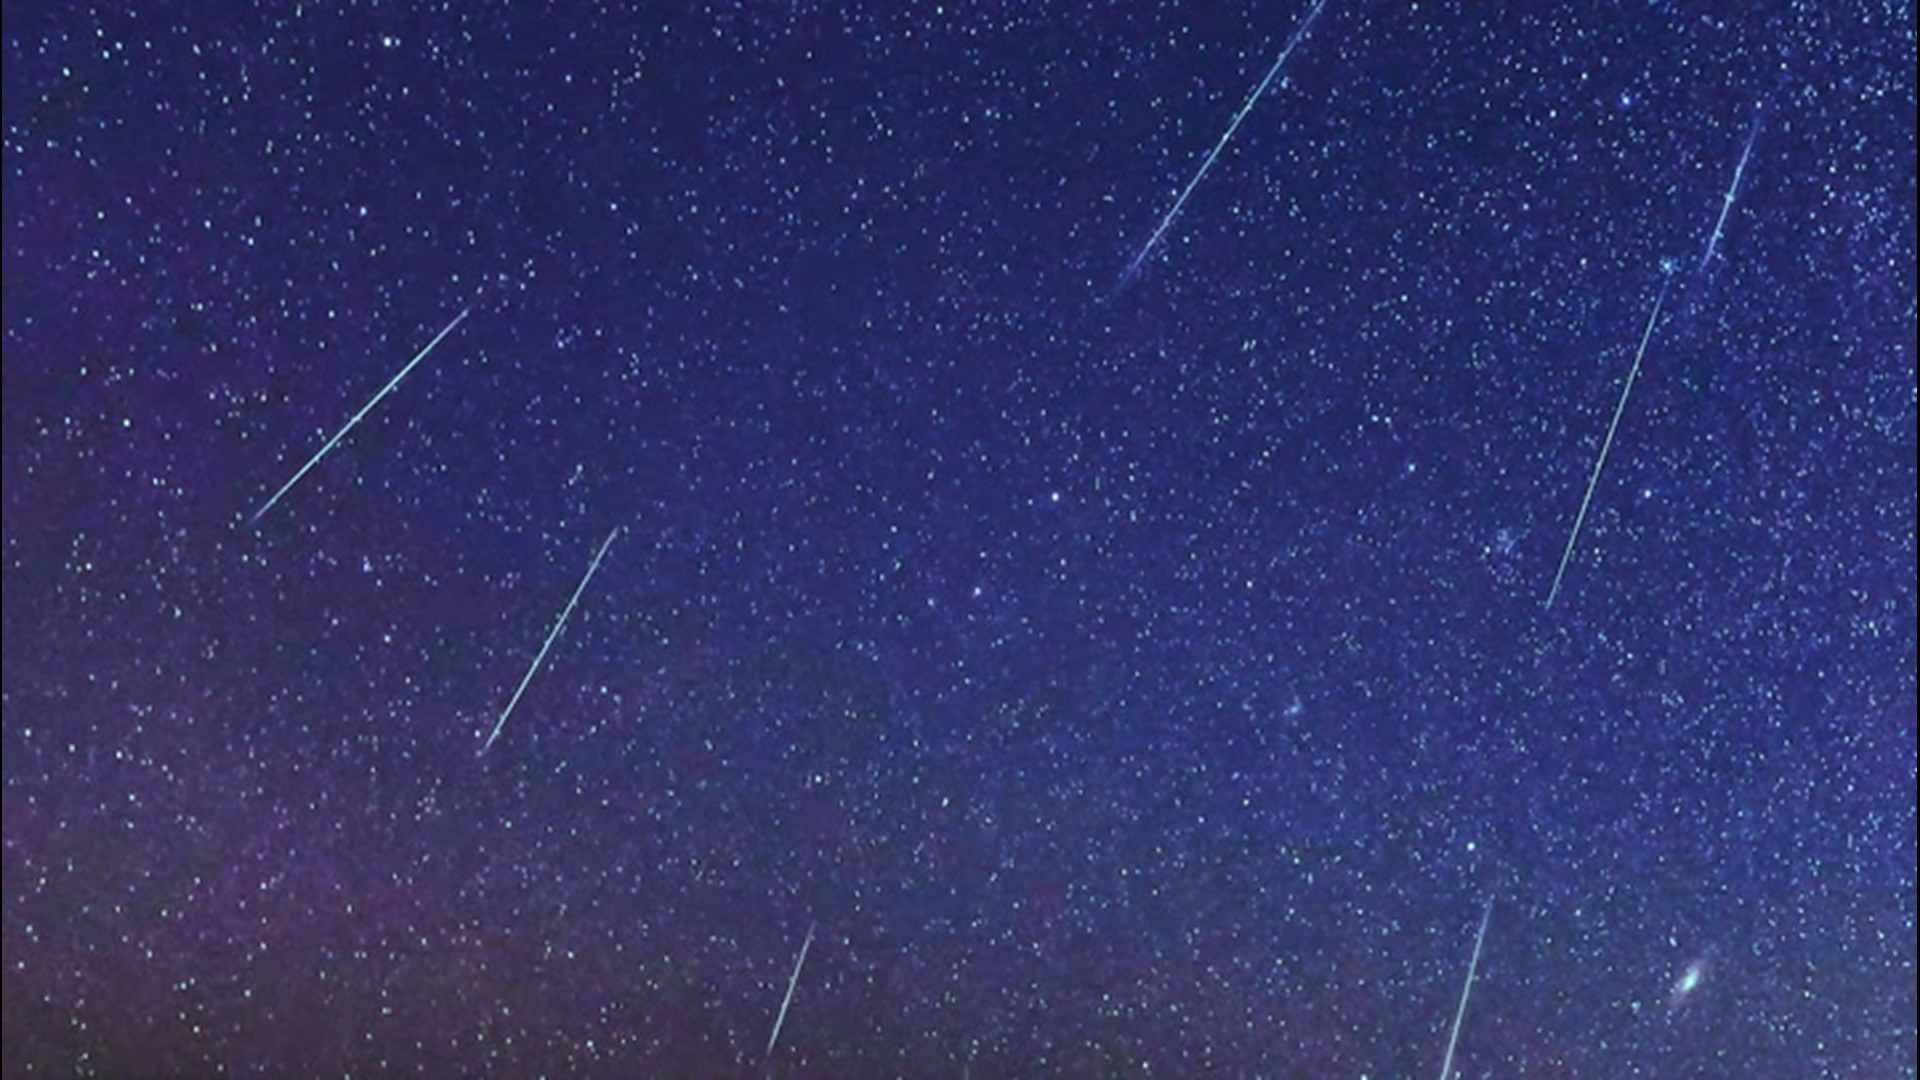 Catch the peak of the Leonid meteor shower on the night of Nov. 16-17. Shooting stars kick off the beginning of the new week with no moon to spoil the show.